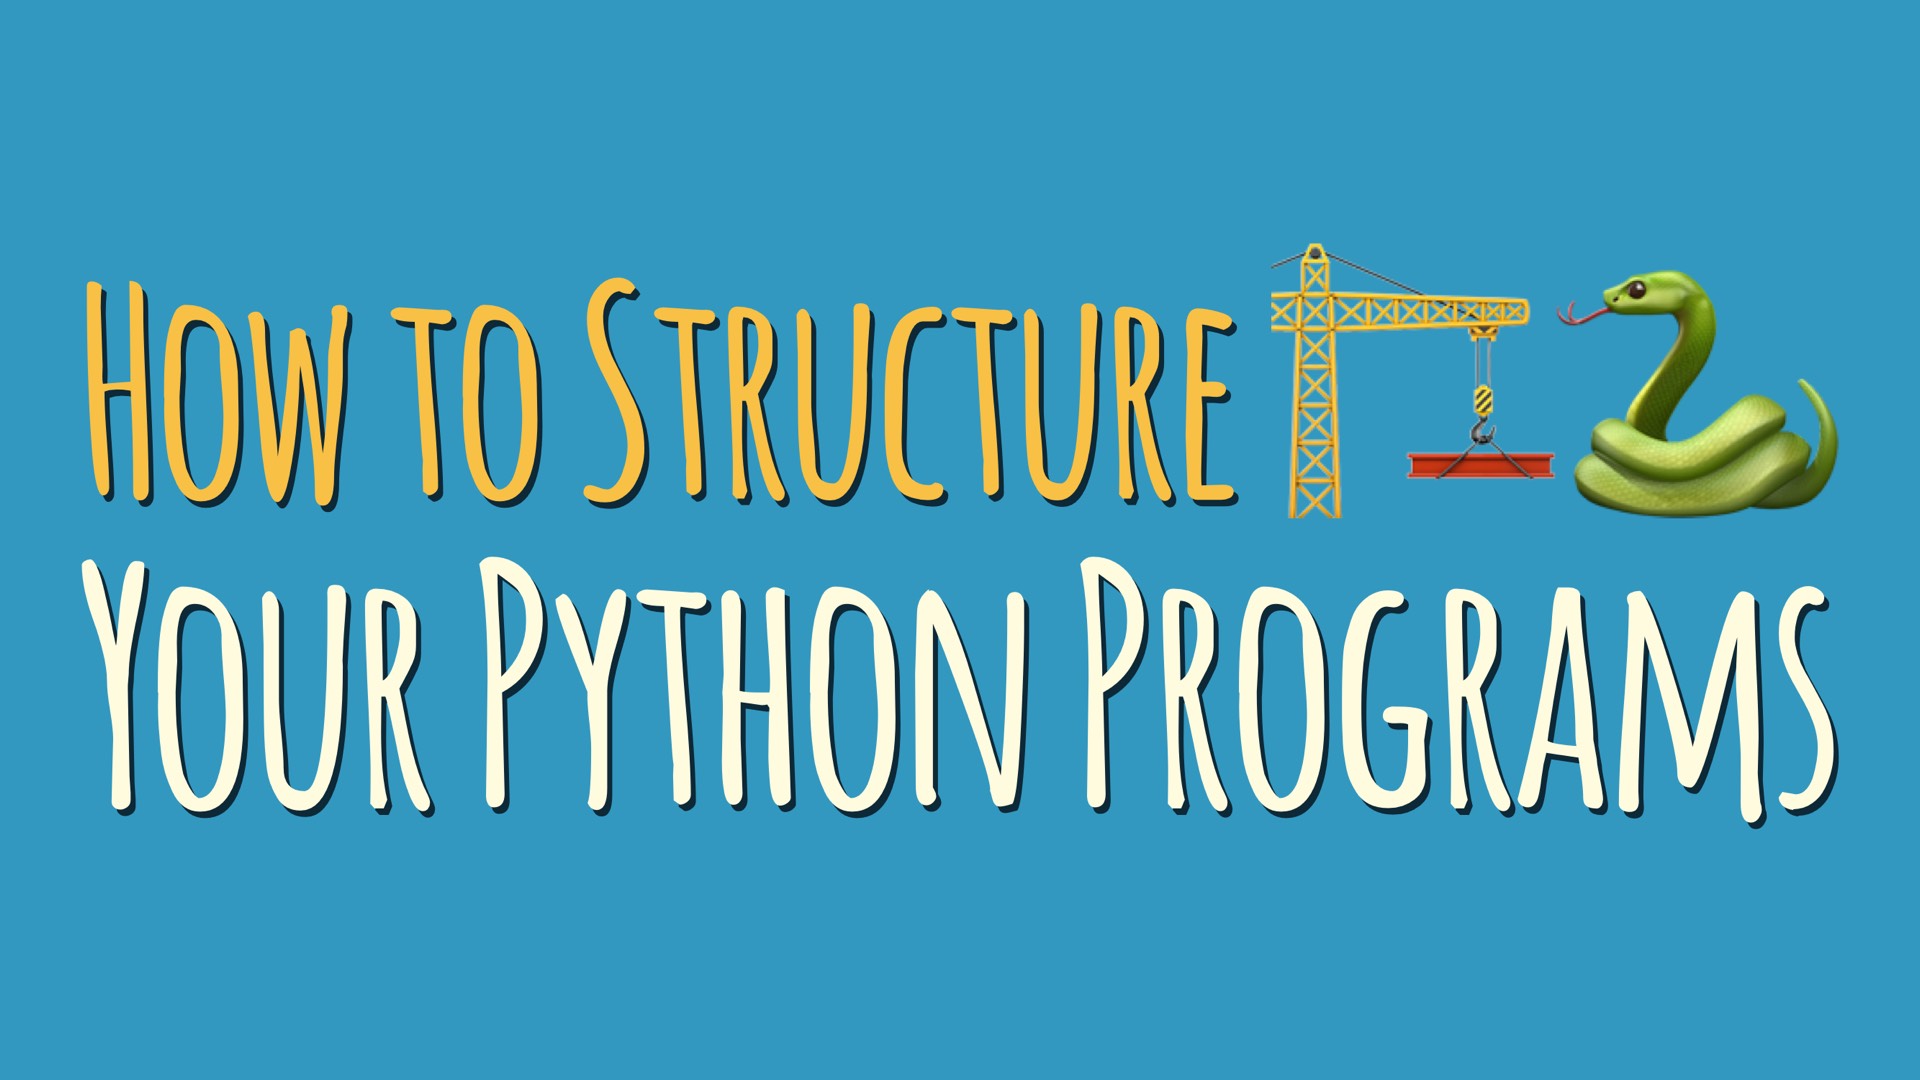 How to Structure Your Python Programs